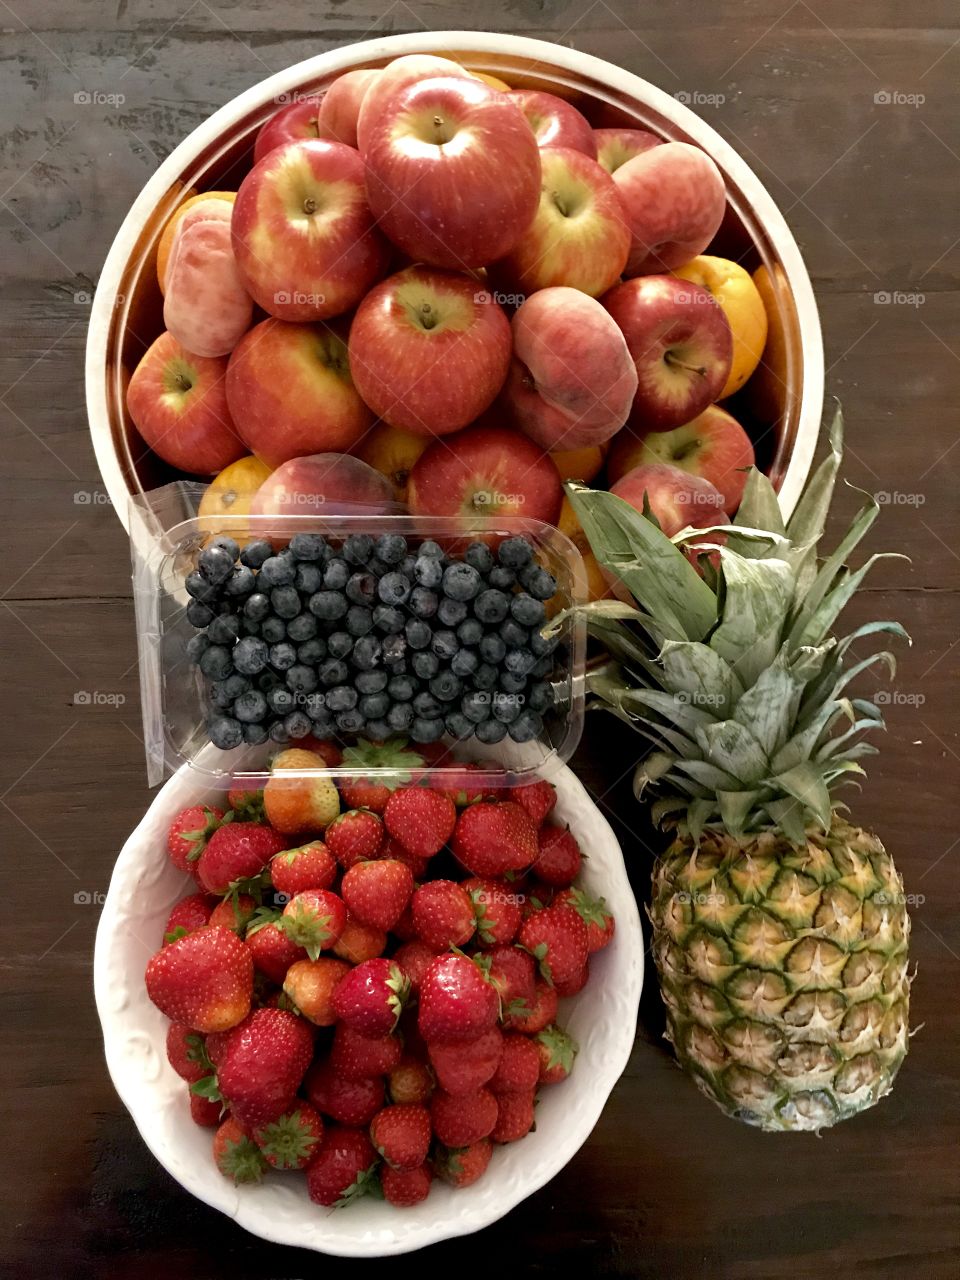 I love Fruits, Fruit is delicious . Fruits are low in calories, high in vitamins, minerals, phytochemicals, and fiber. 
